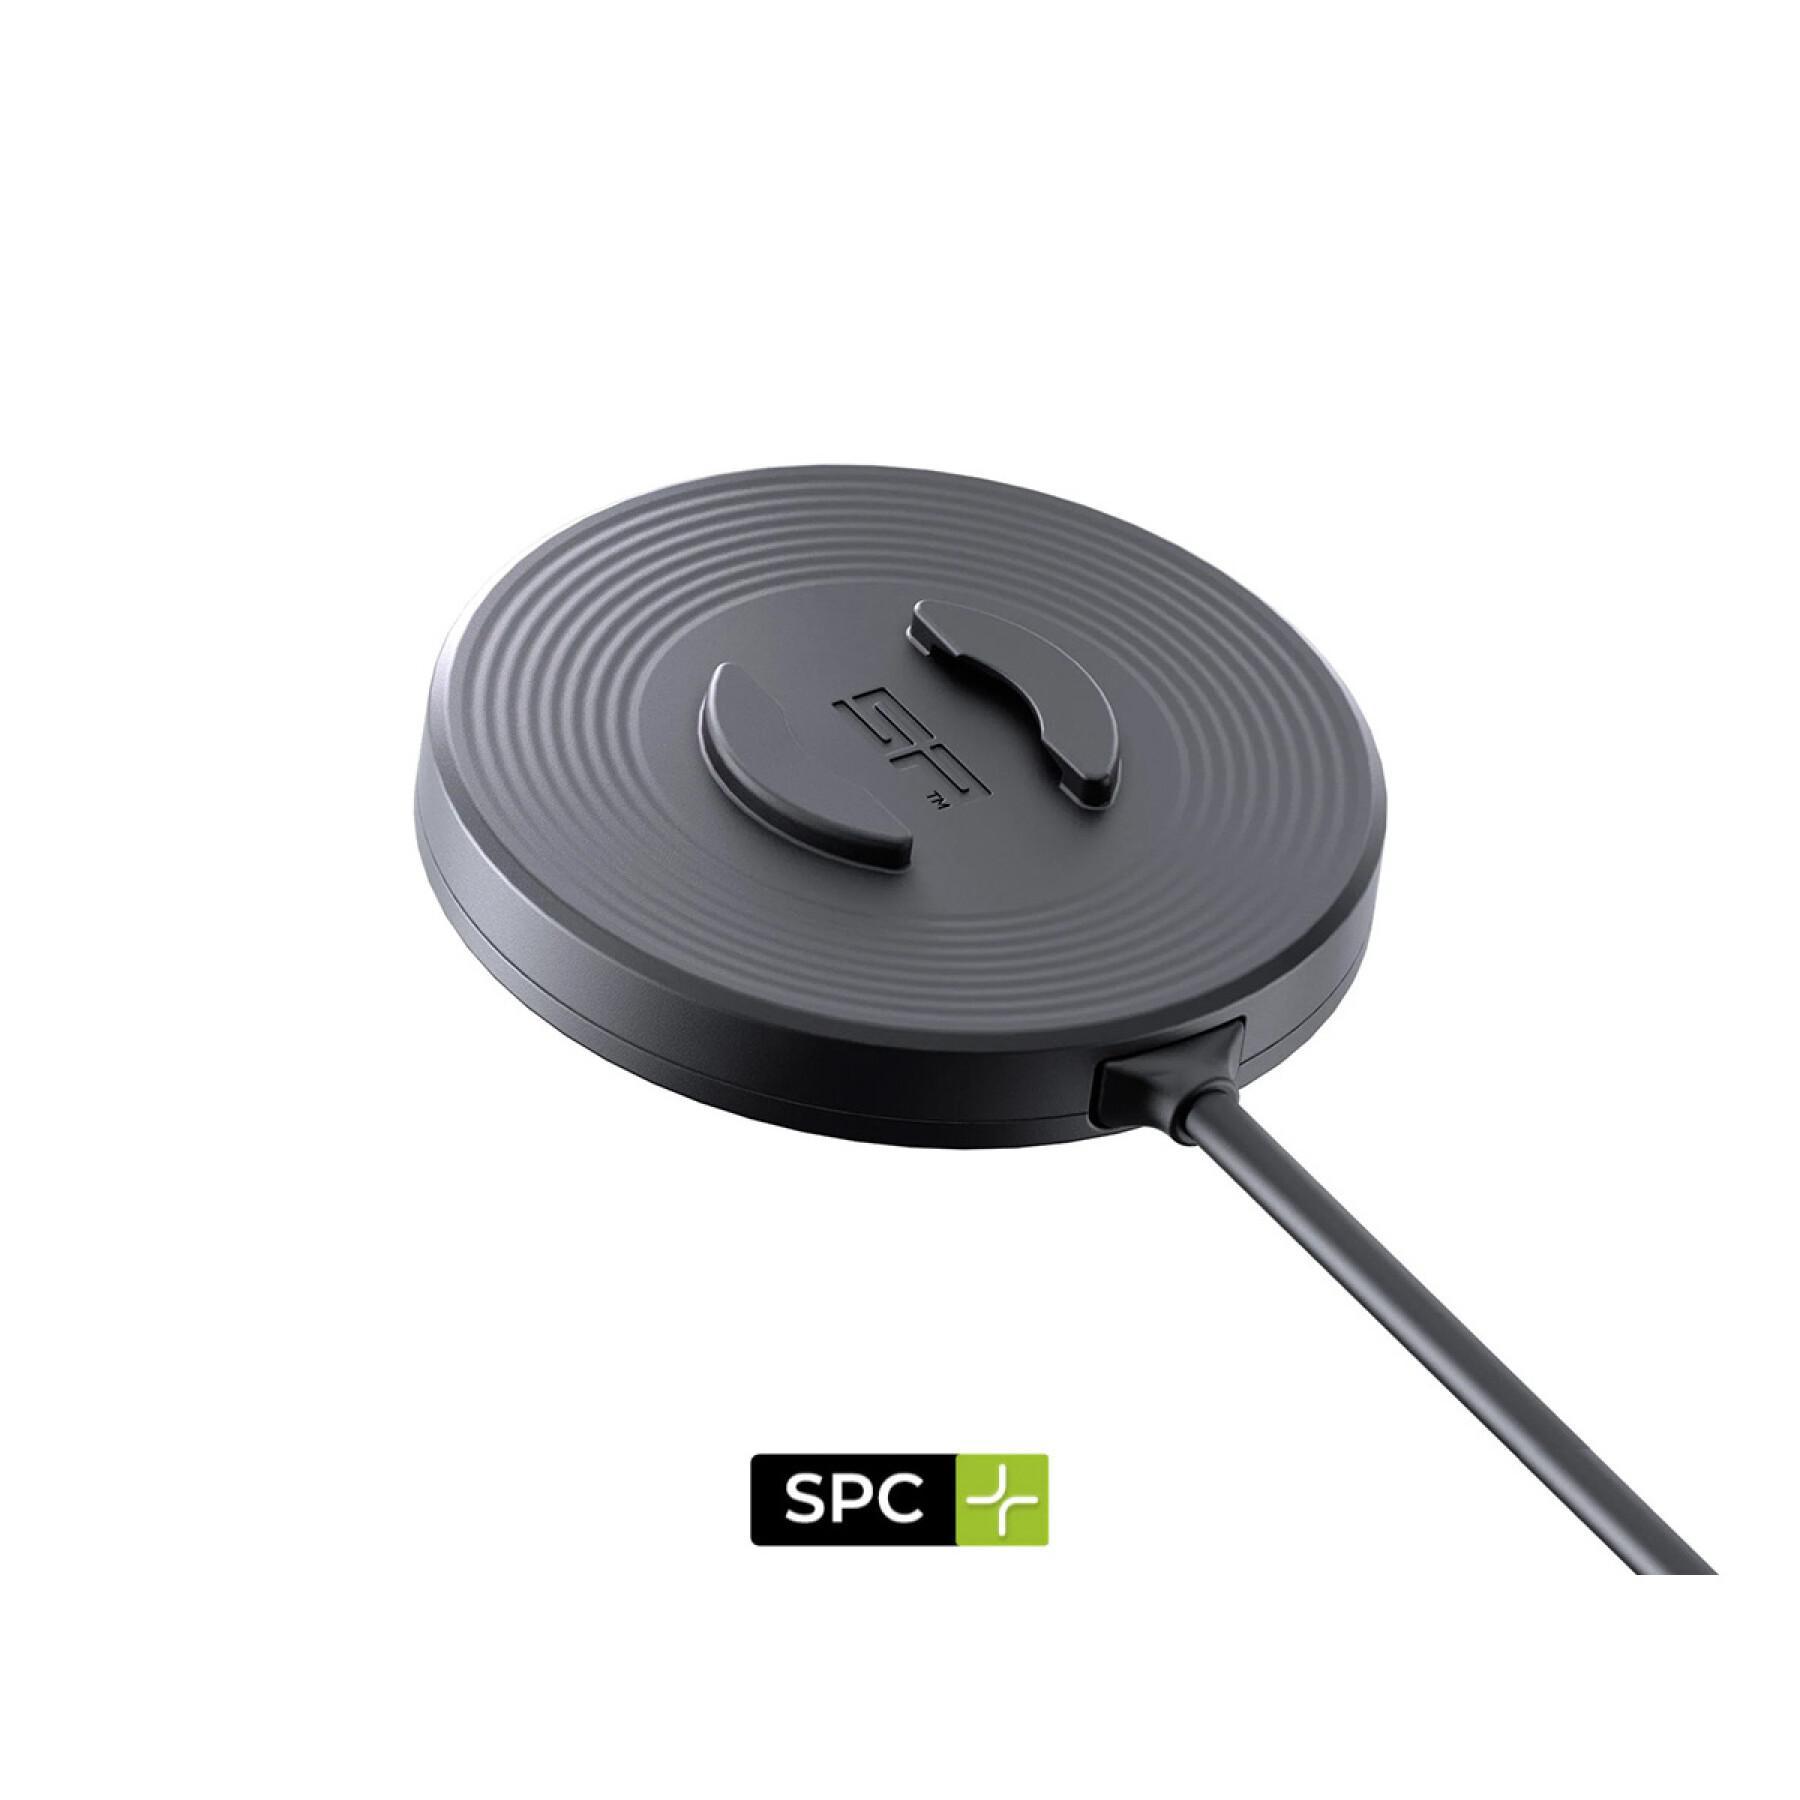 Charger SP Connect SPC+